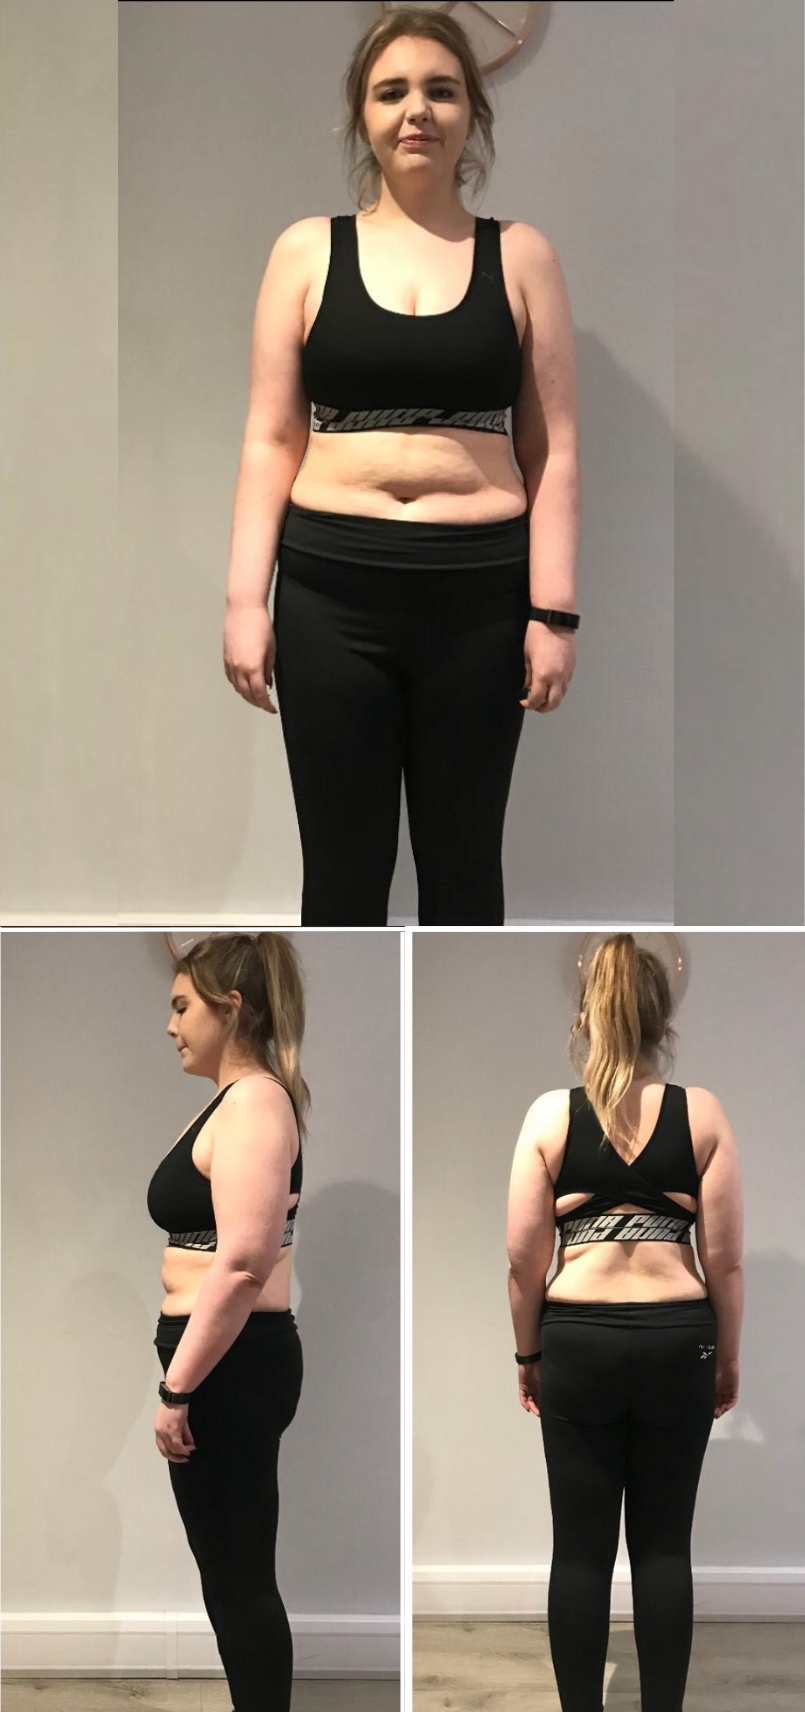 Olivia's after personal training transformation photos